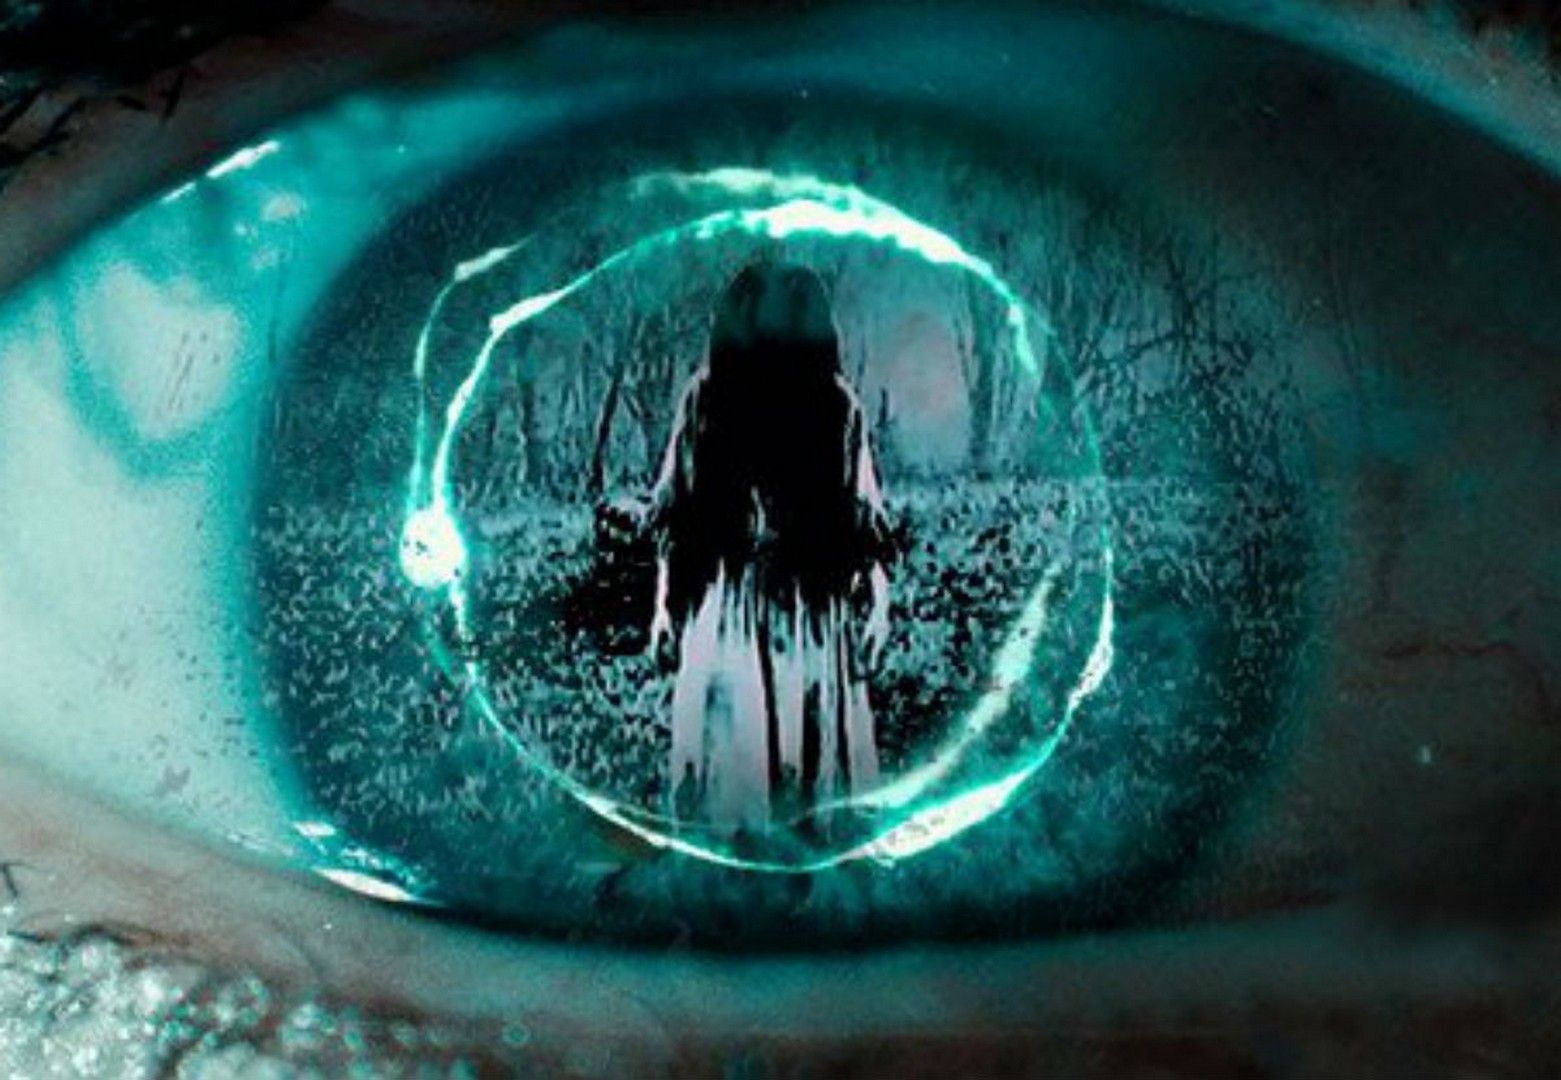 The Ring Wallpaper